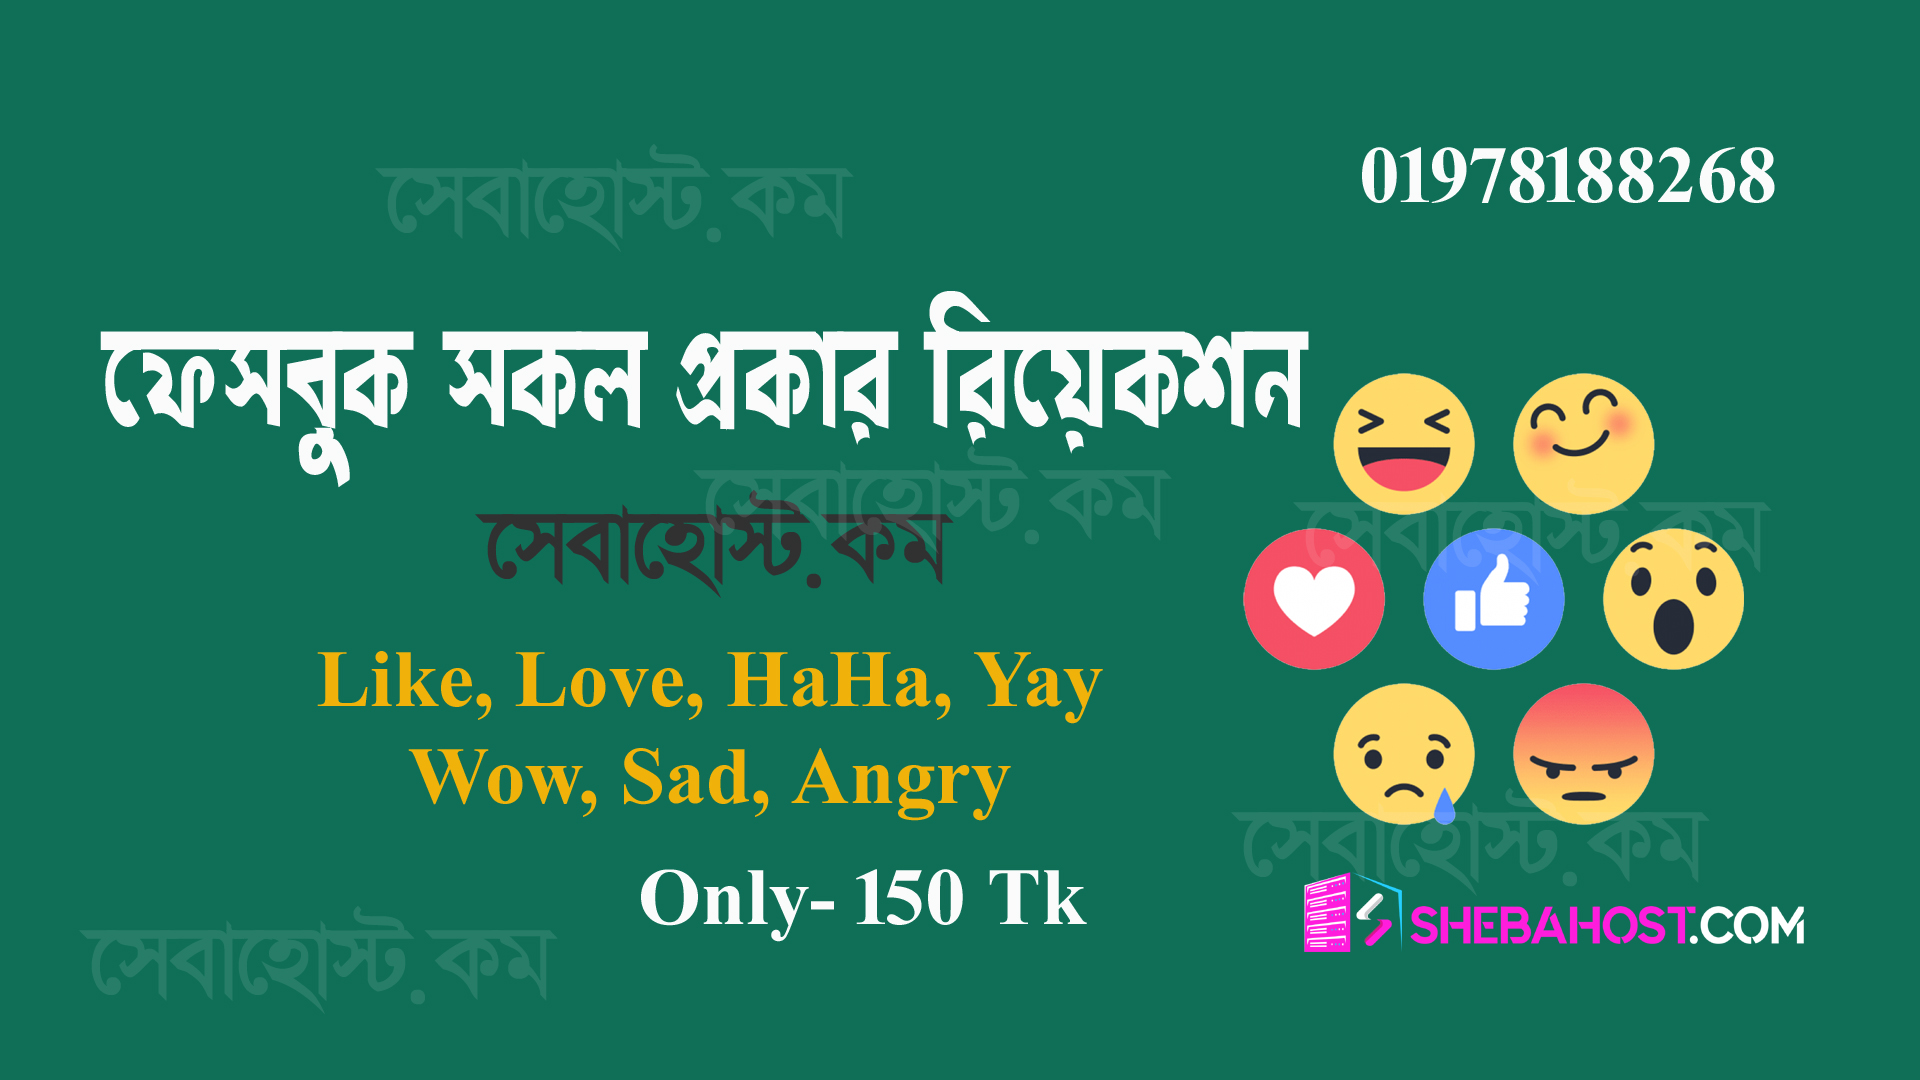 108244🇮🇳 Indian Facebook Service Delivery 5 Minute- Real Page Follower- Post Like Love, Care Wow, etc.